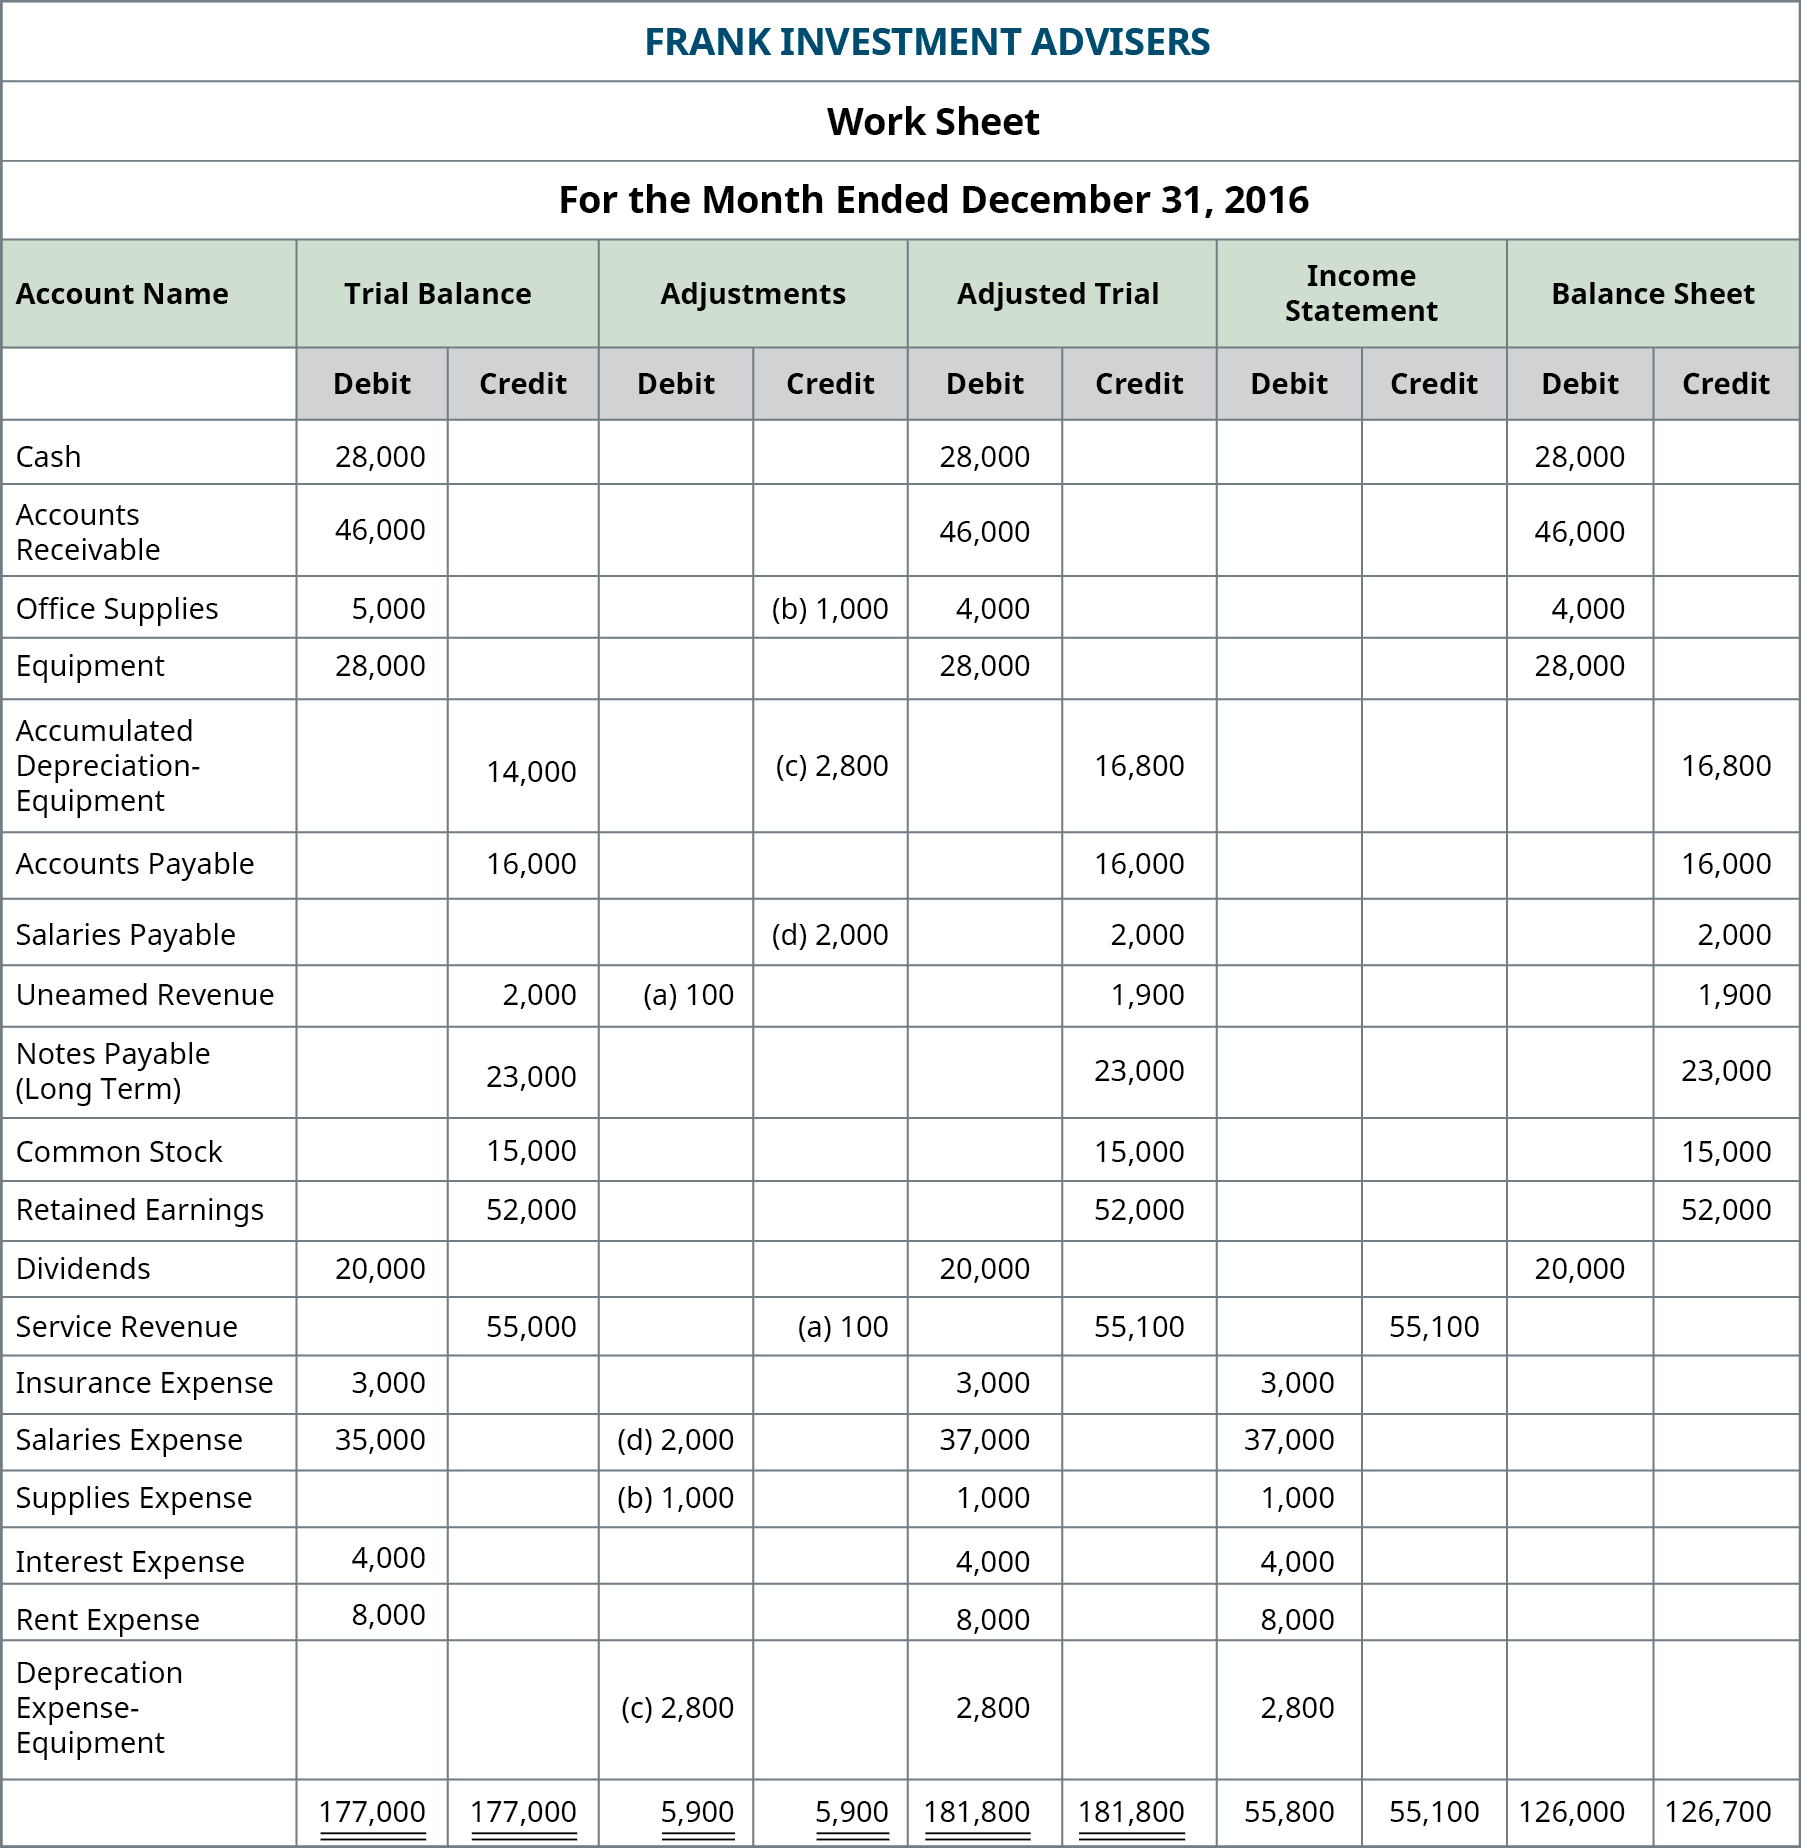 Prepare Financial Statements Using The Adjusted Trial Balance